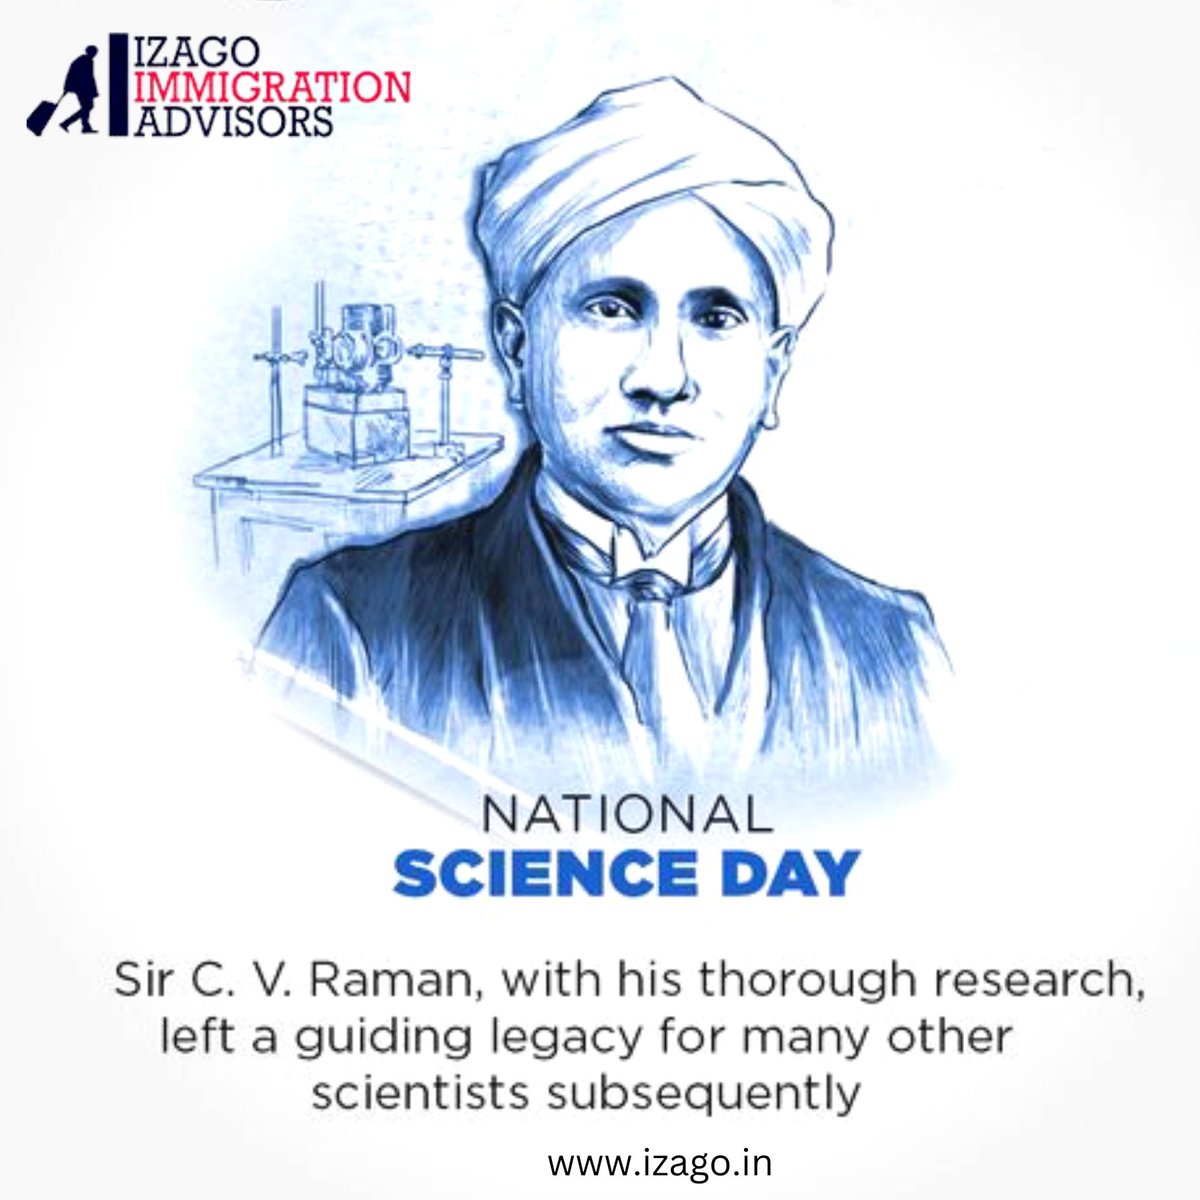 Sir C. V. Raman, with his thorough research, left a guiding legacy for many other scientists subsequently National Science Day...! 

#Hammerstrength #izagi #imigration #Workout #FitnessActivities #FitnessWorkout #NationalScienceDay #National #ScienceDay #ScienceDay2020 #CVRaman